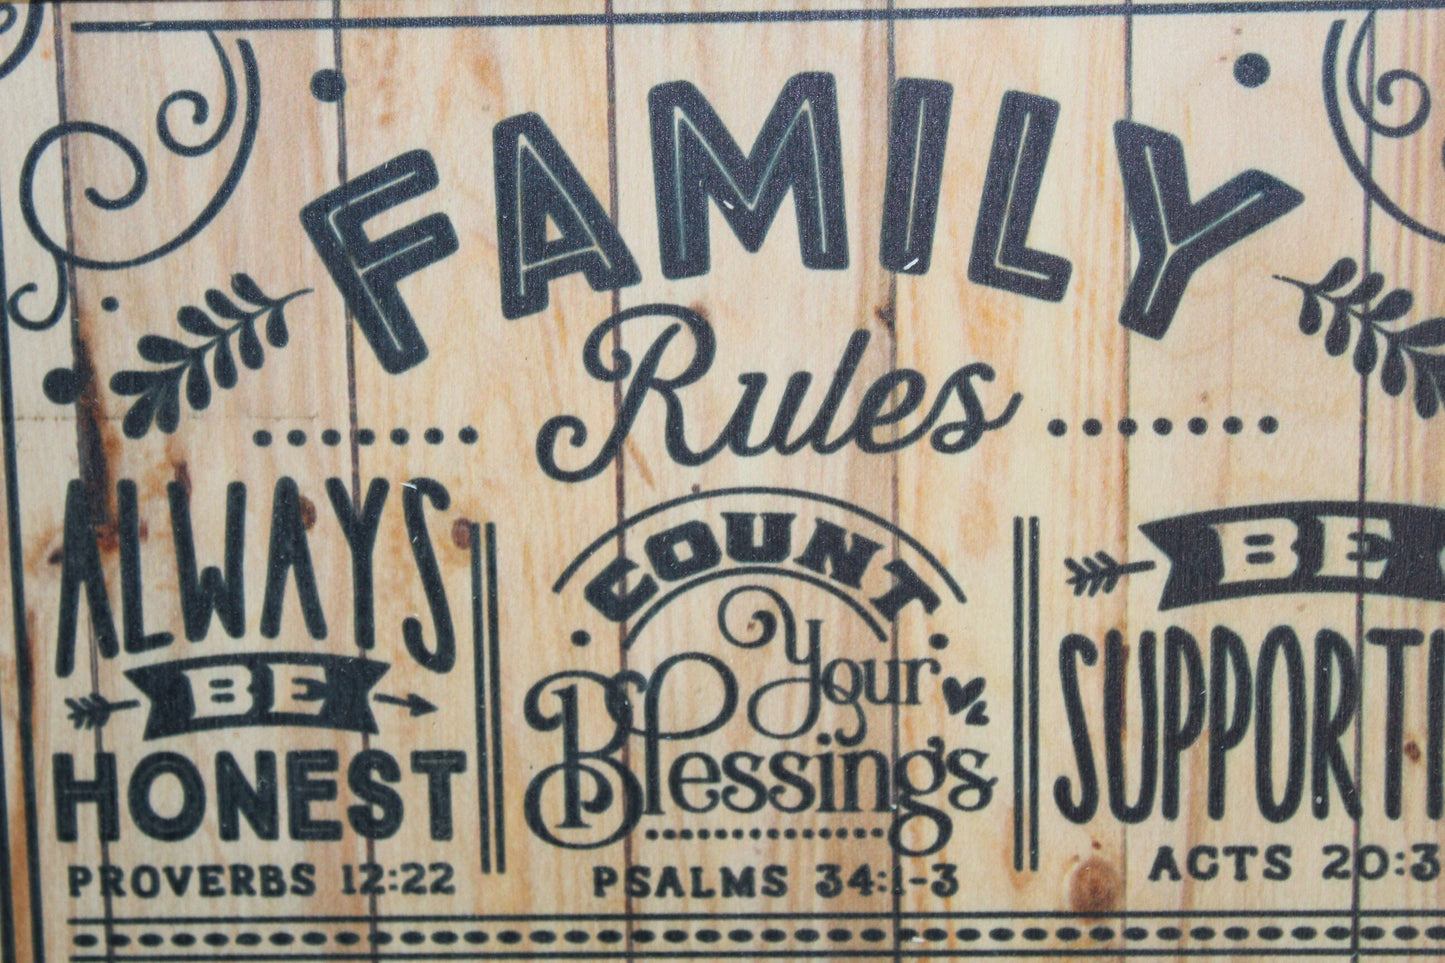 Family Rules List Wood Sign Honest Blessings Supportive Wall Hanging Decoration Standards Principles Farmhouse Rustic Code Print